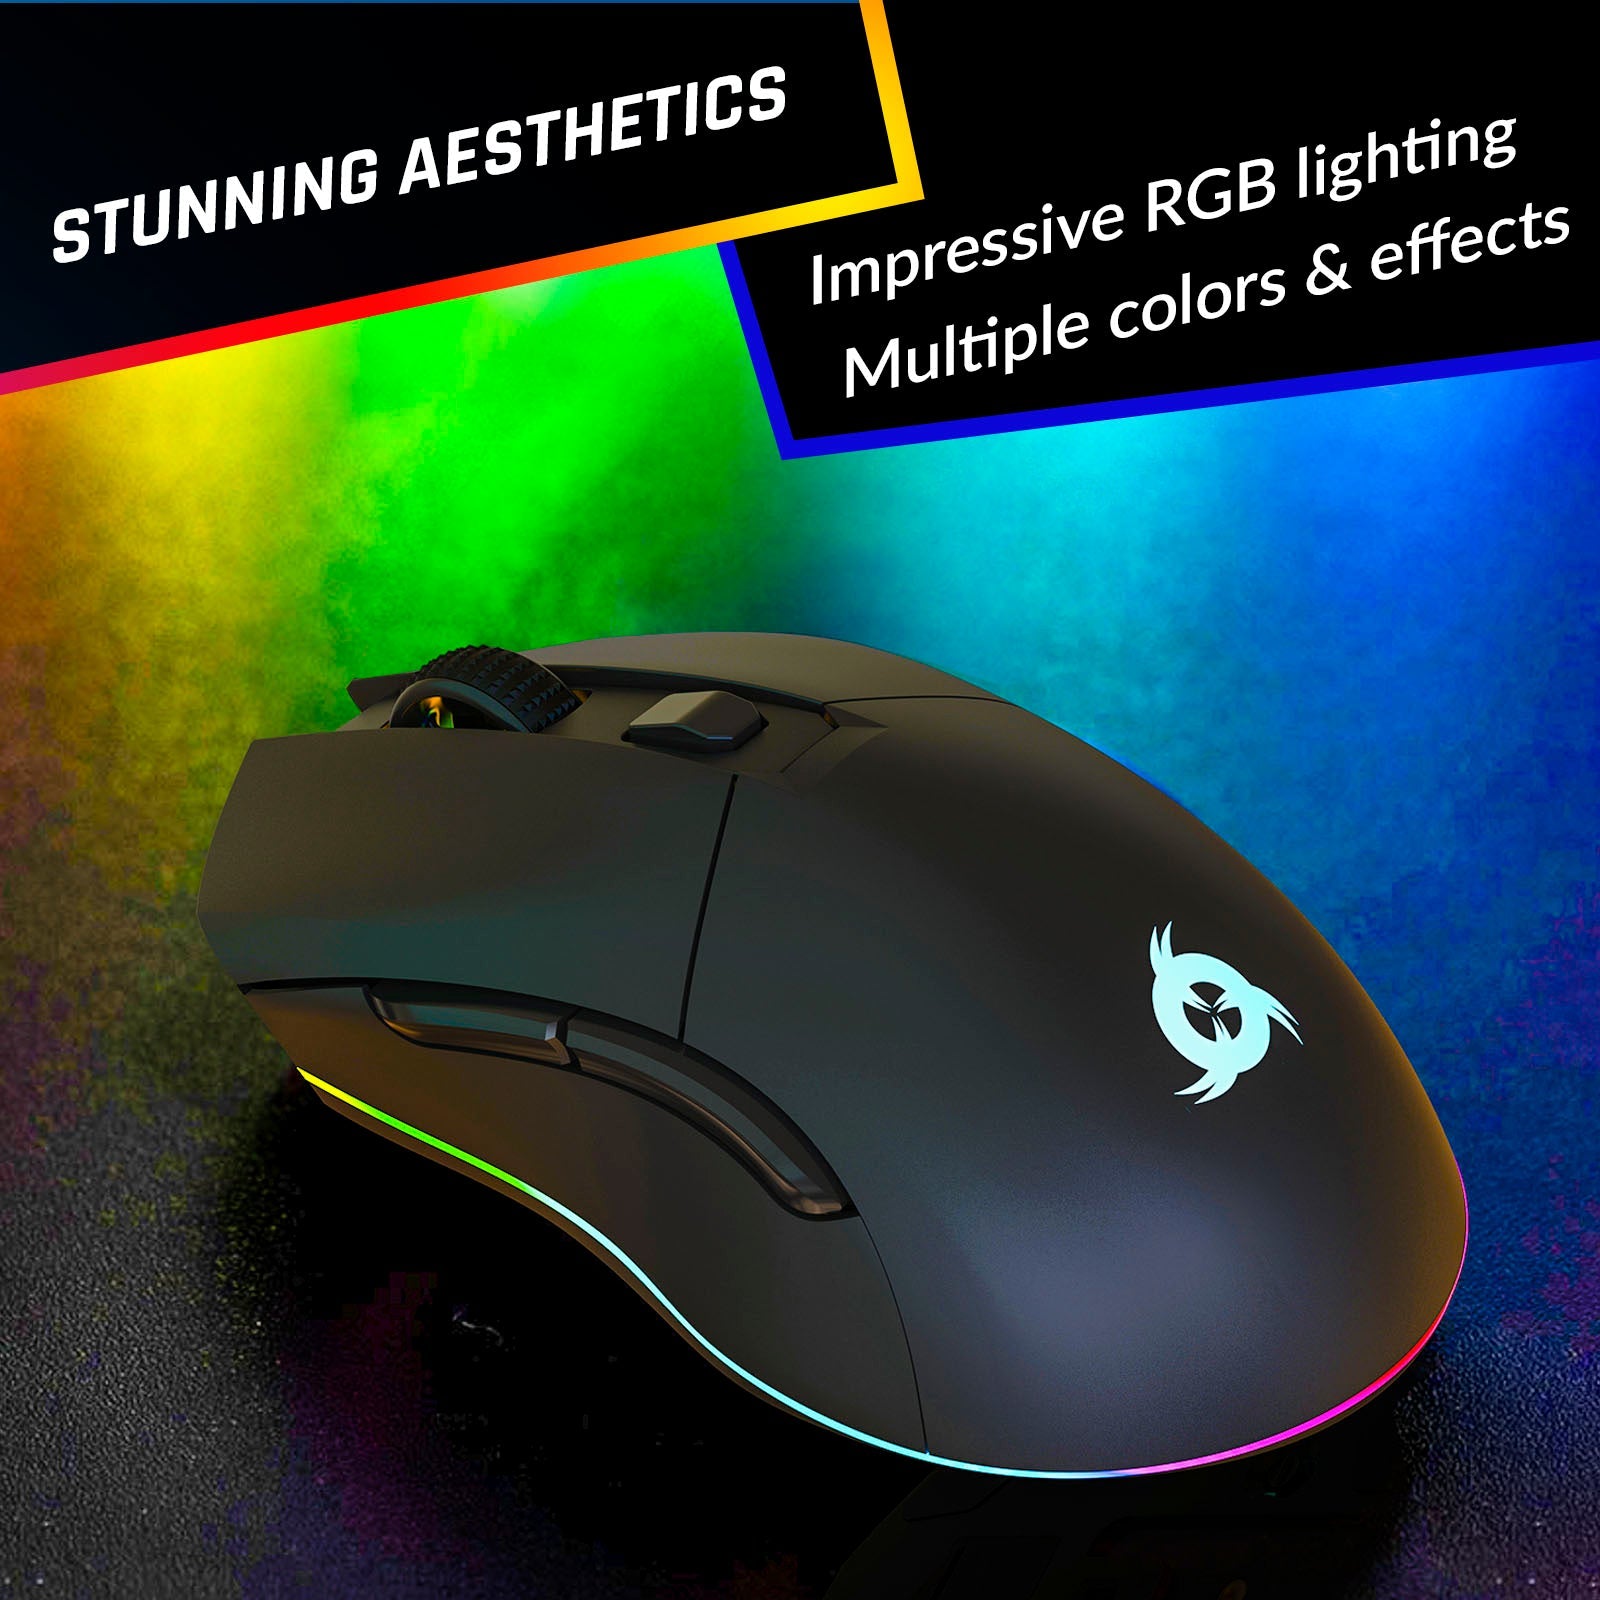 KLIM Blaze Pro Wireless RGB Gaming Mouse | Charging Base Included ...